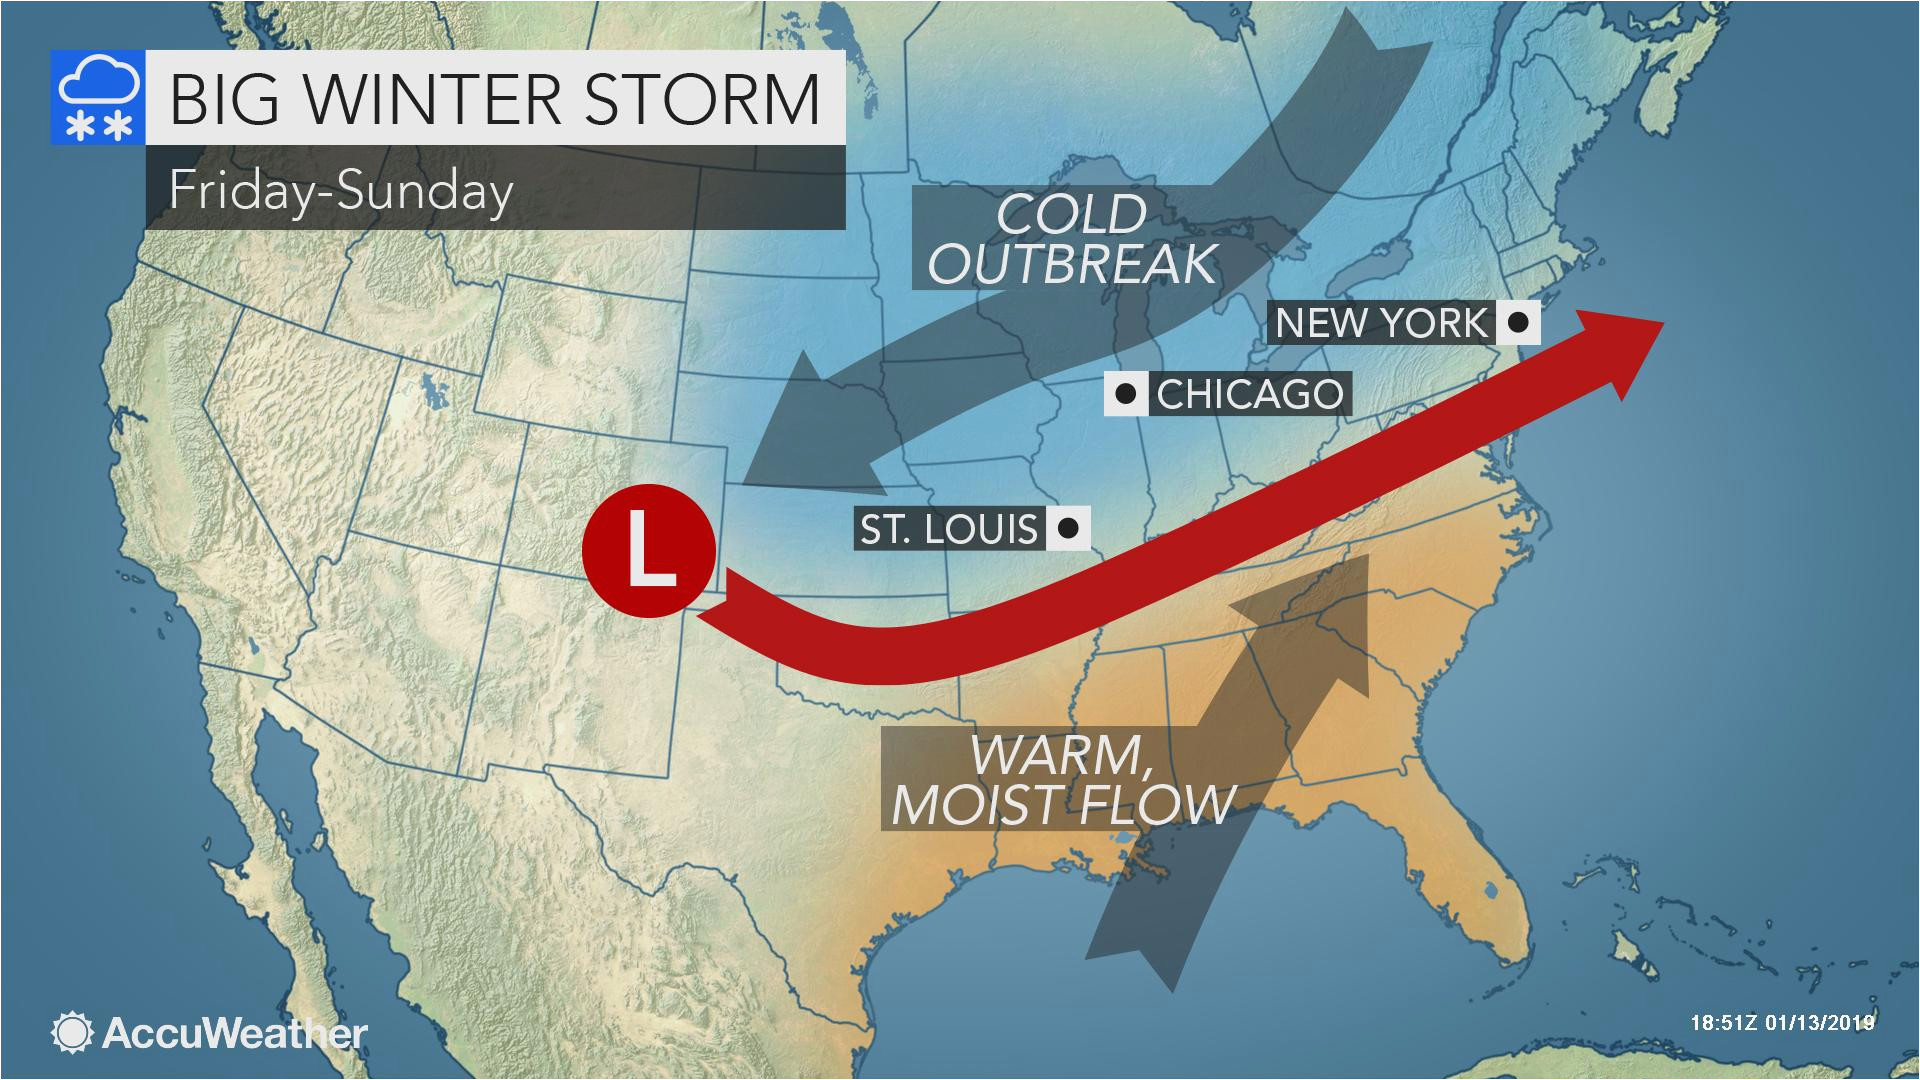 Temperature Map Minnesota Eastern Central Us to Face More Winter Storms Polar Plunge after